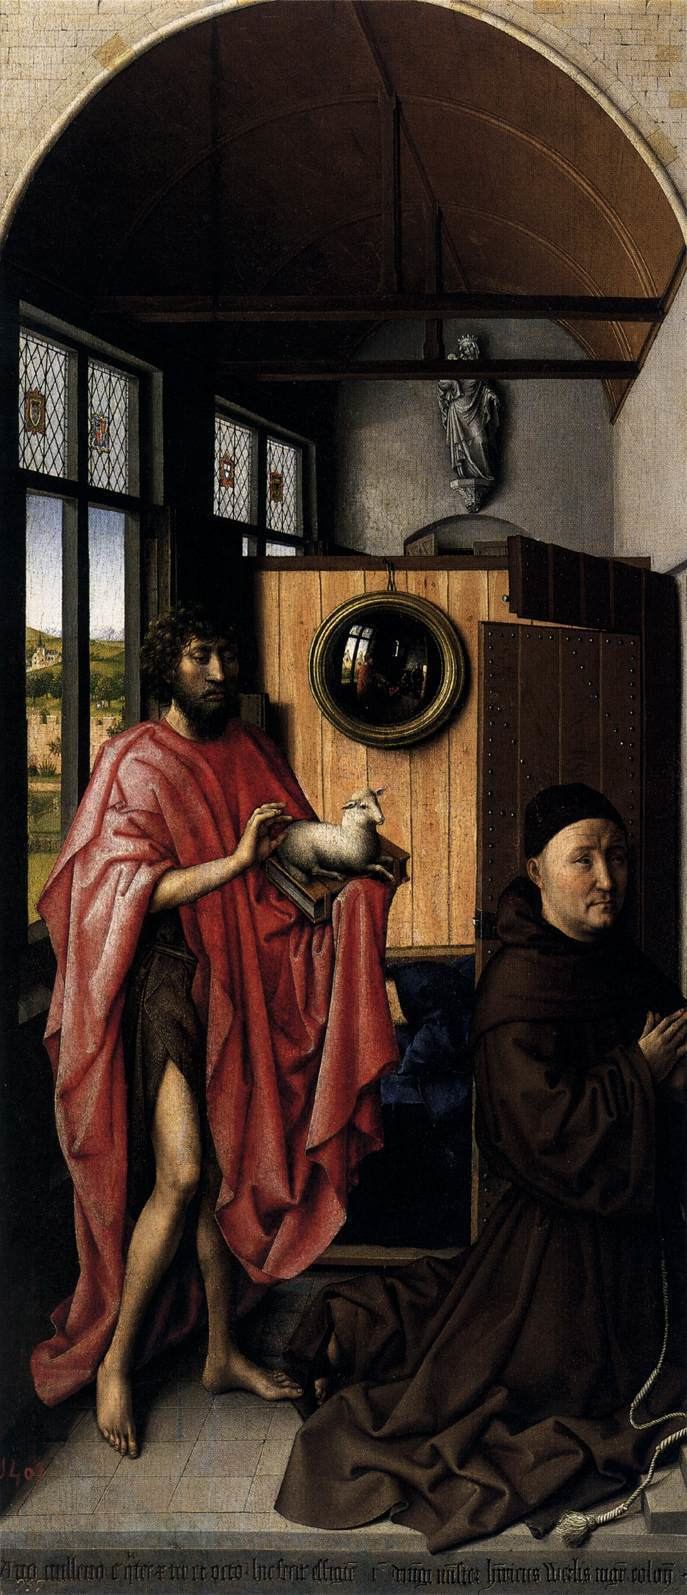 Robert Campin The Werl Altarpiece left wing by MASTER of Flmalle